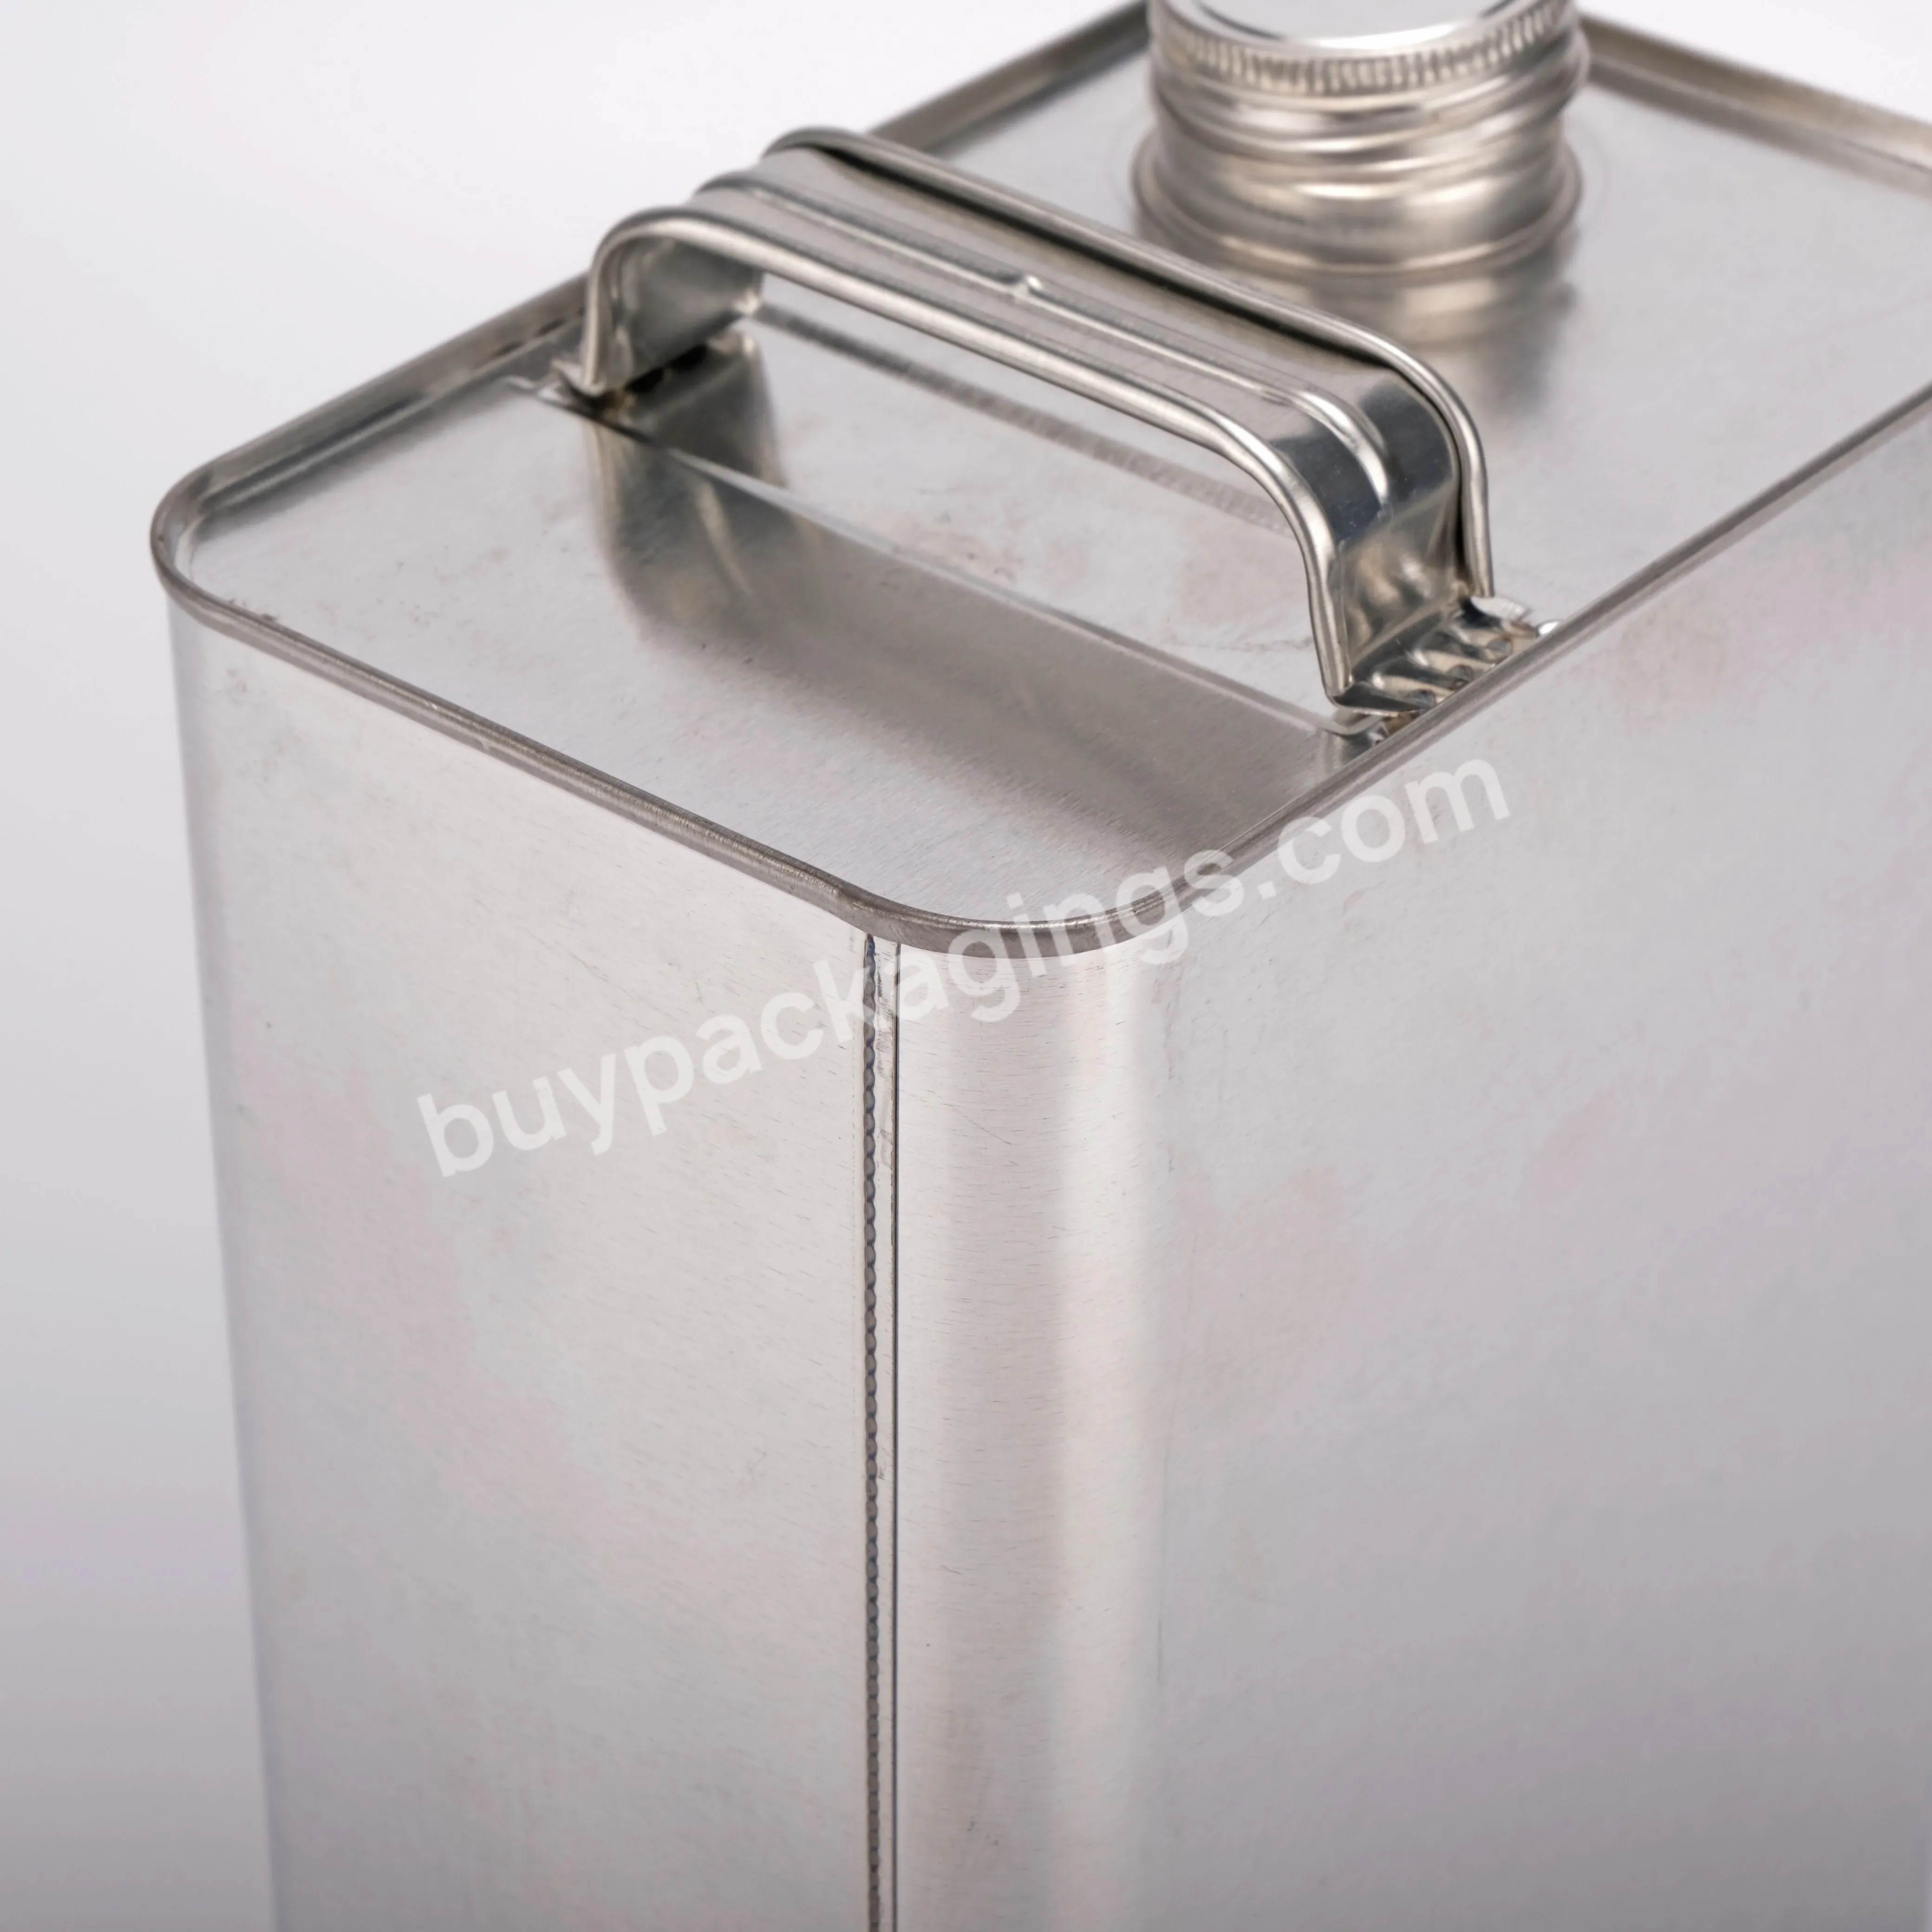 New Hot Sale 1gallon Printed F-style Square Metal Tin Can With Metal Handle And Screw Top For Motor Oil